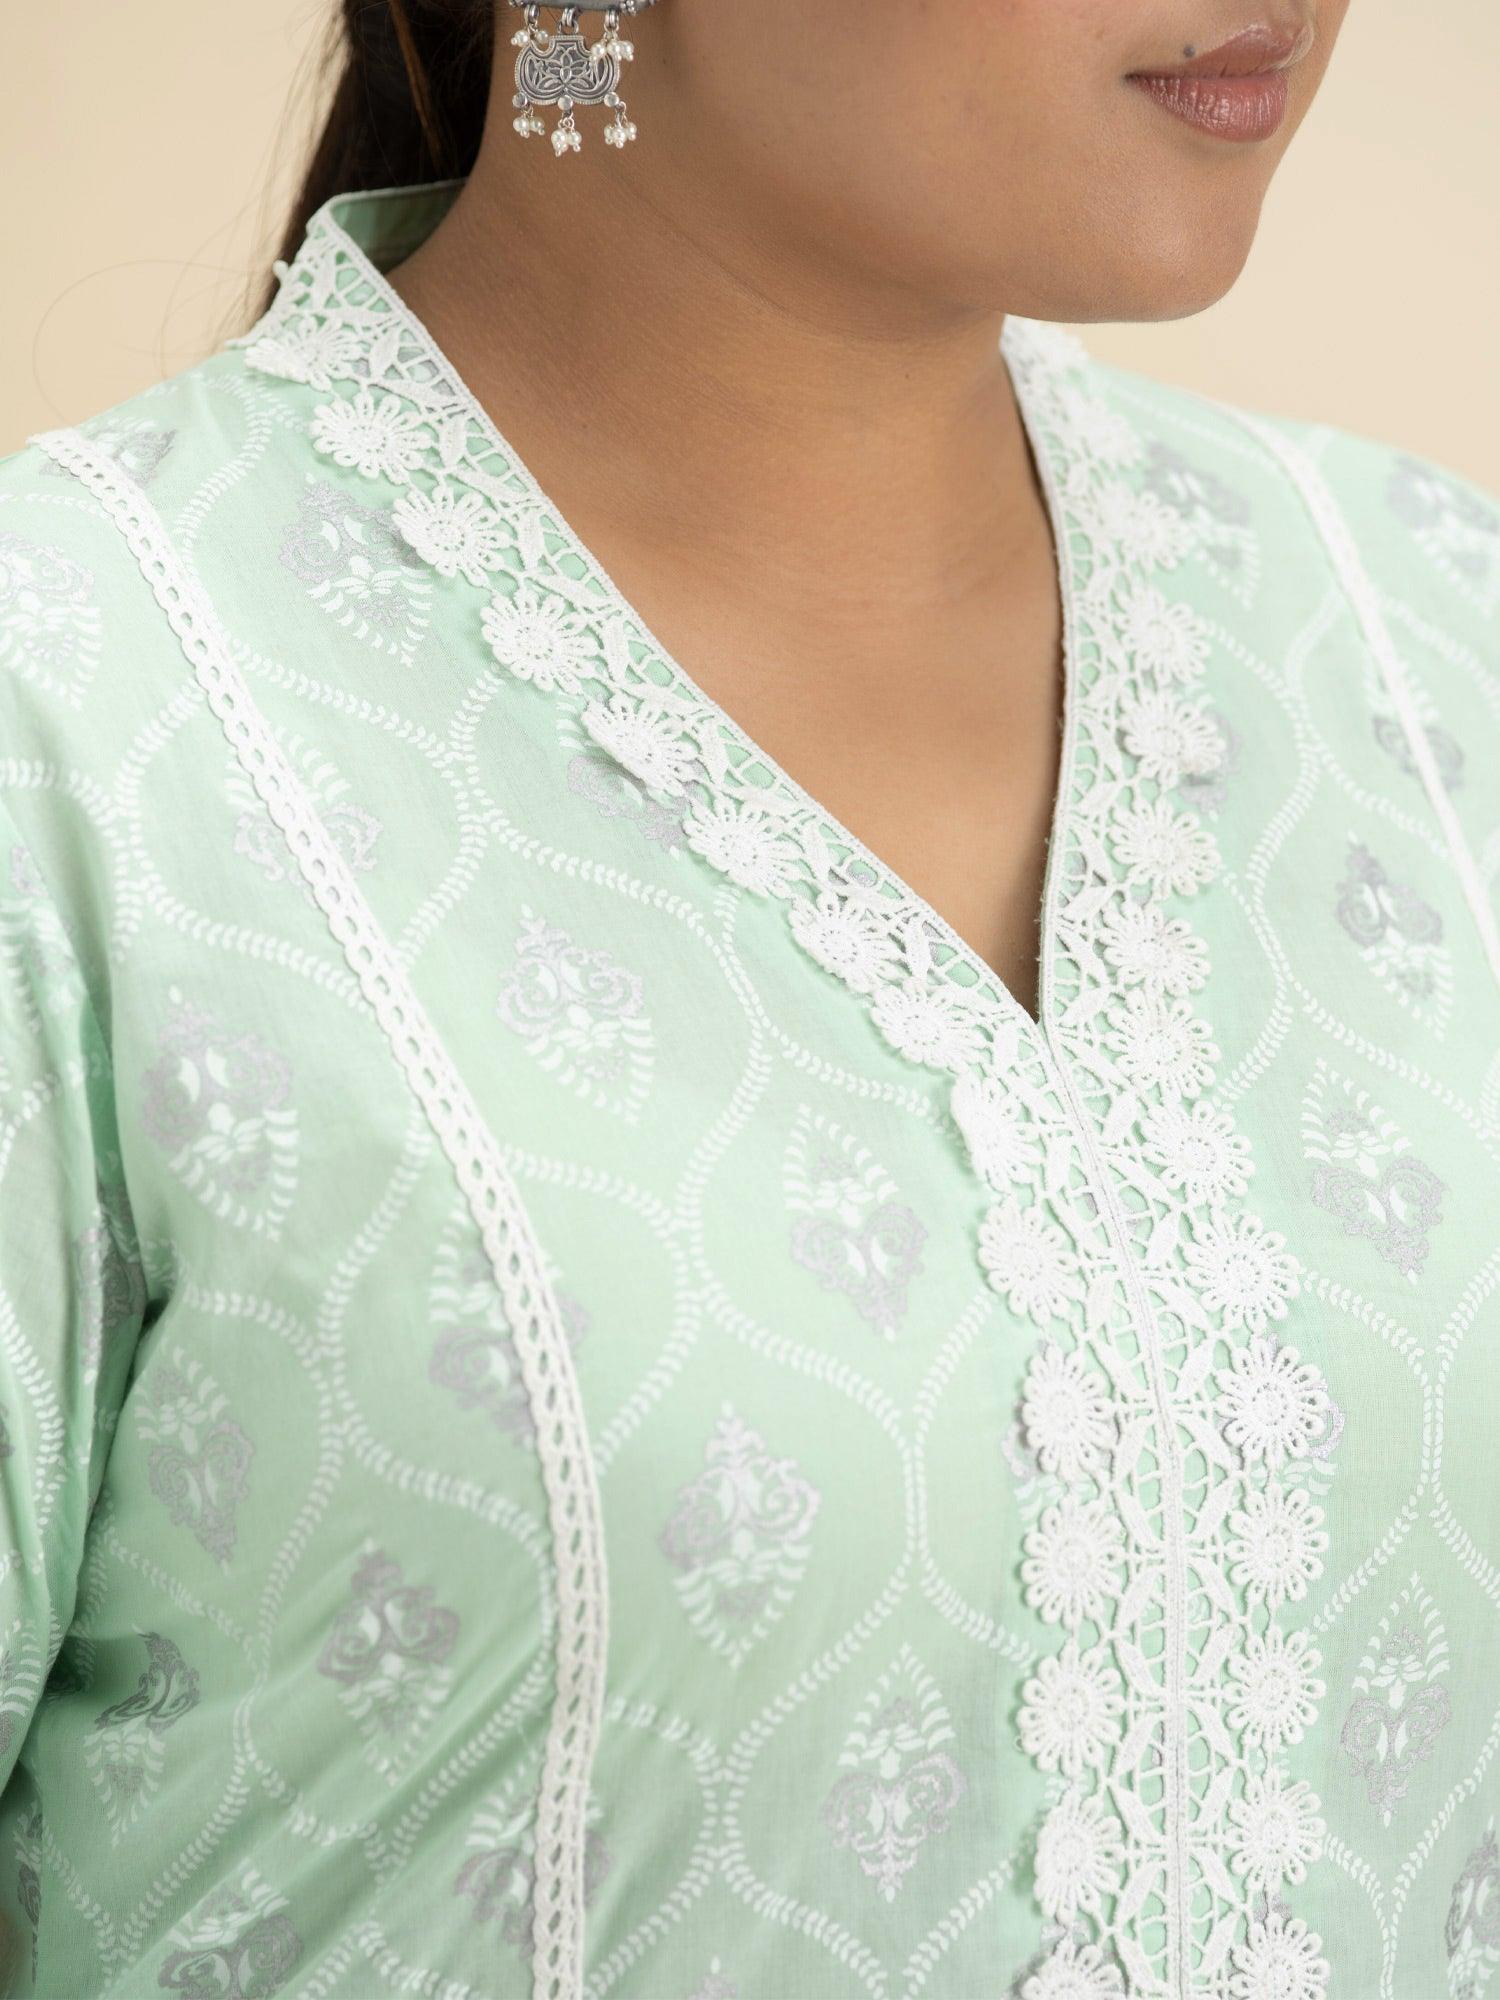 Plus Size Green Printed Cotton Straight Sharara Suit Set